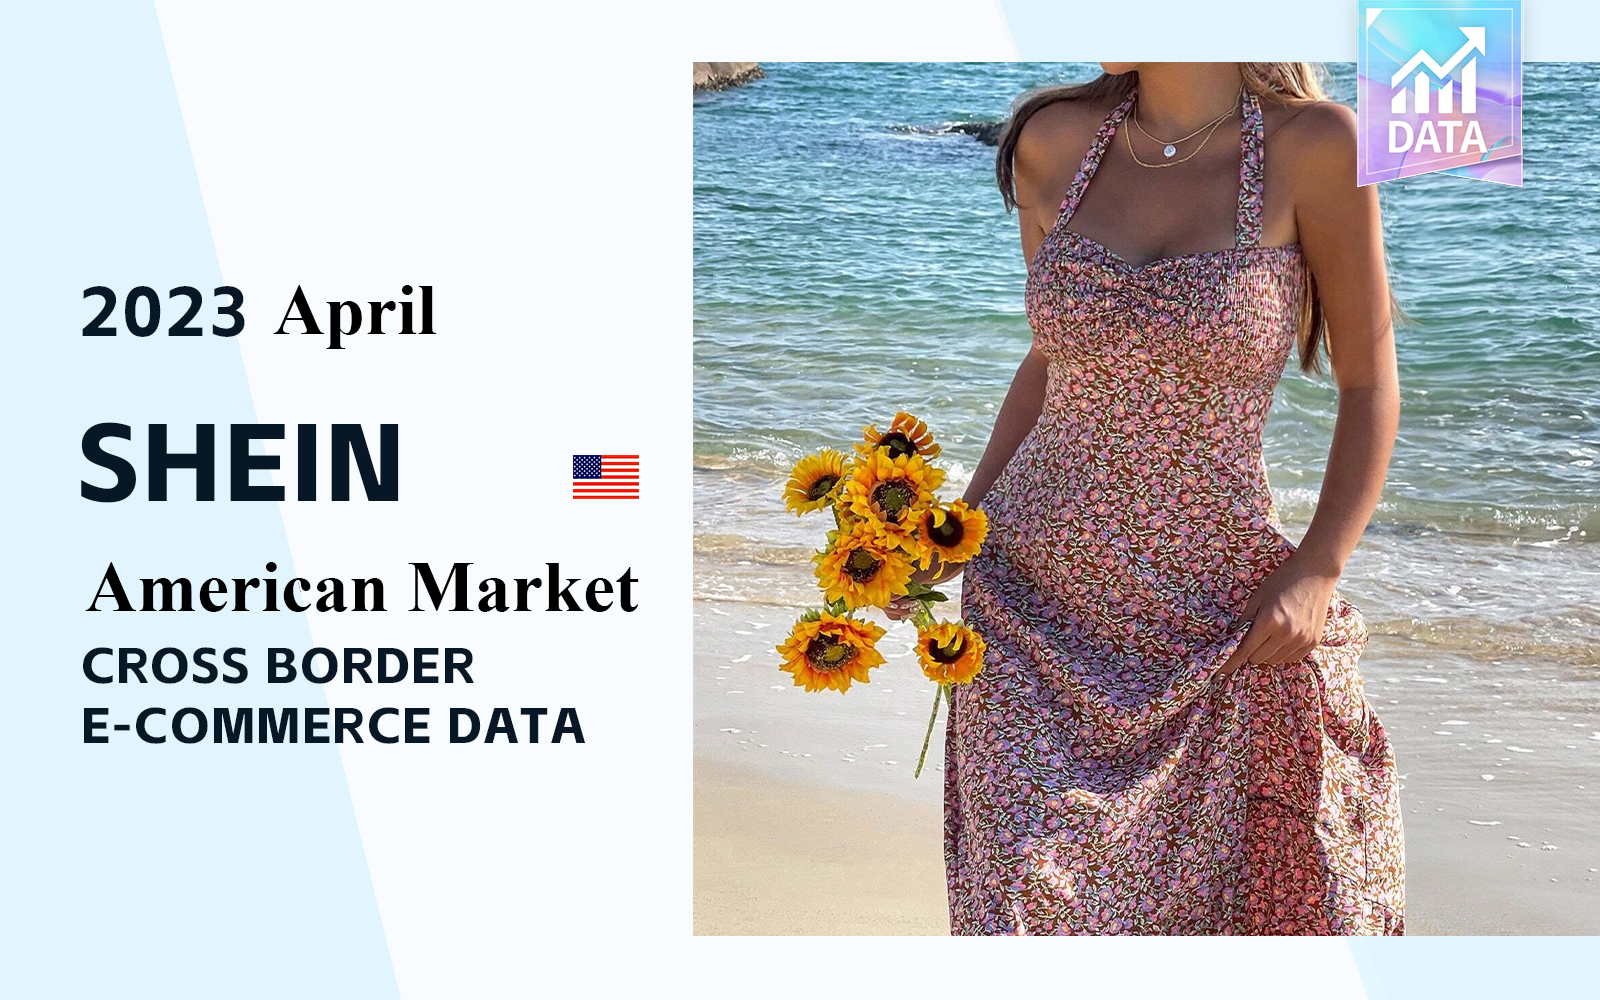 Tropical Vacation -- The Cross-border E-commerce Brand Analysis of SHEIN